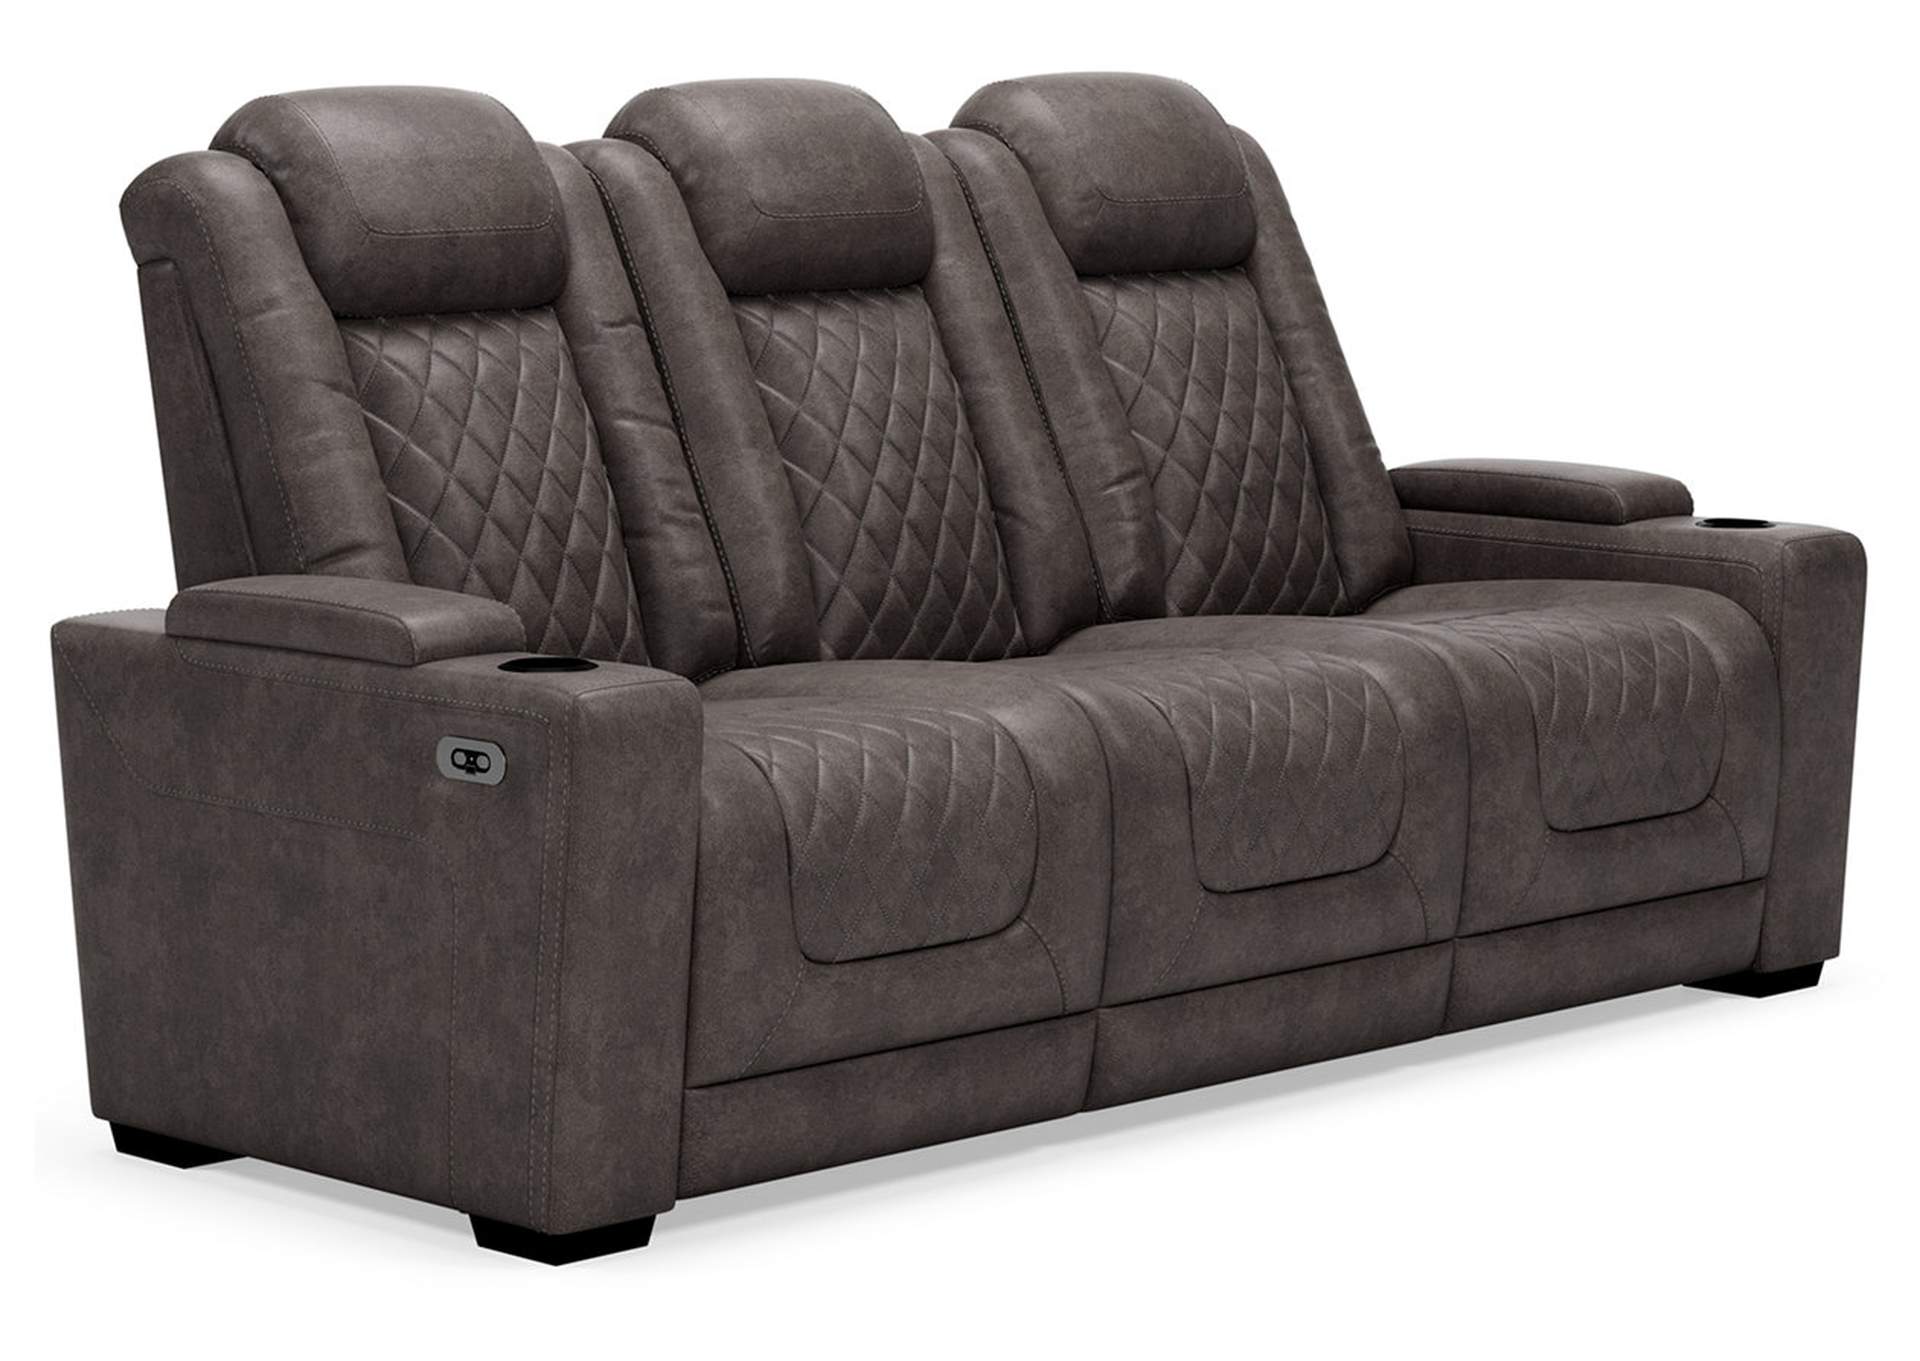 HyllMont Sofa, Loveseat and Recliner,Signature Design By Ashley